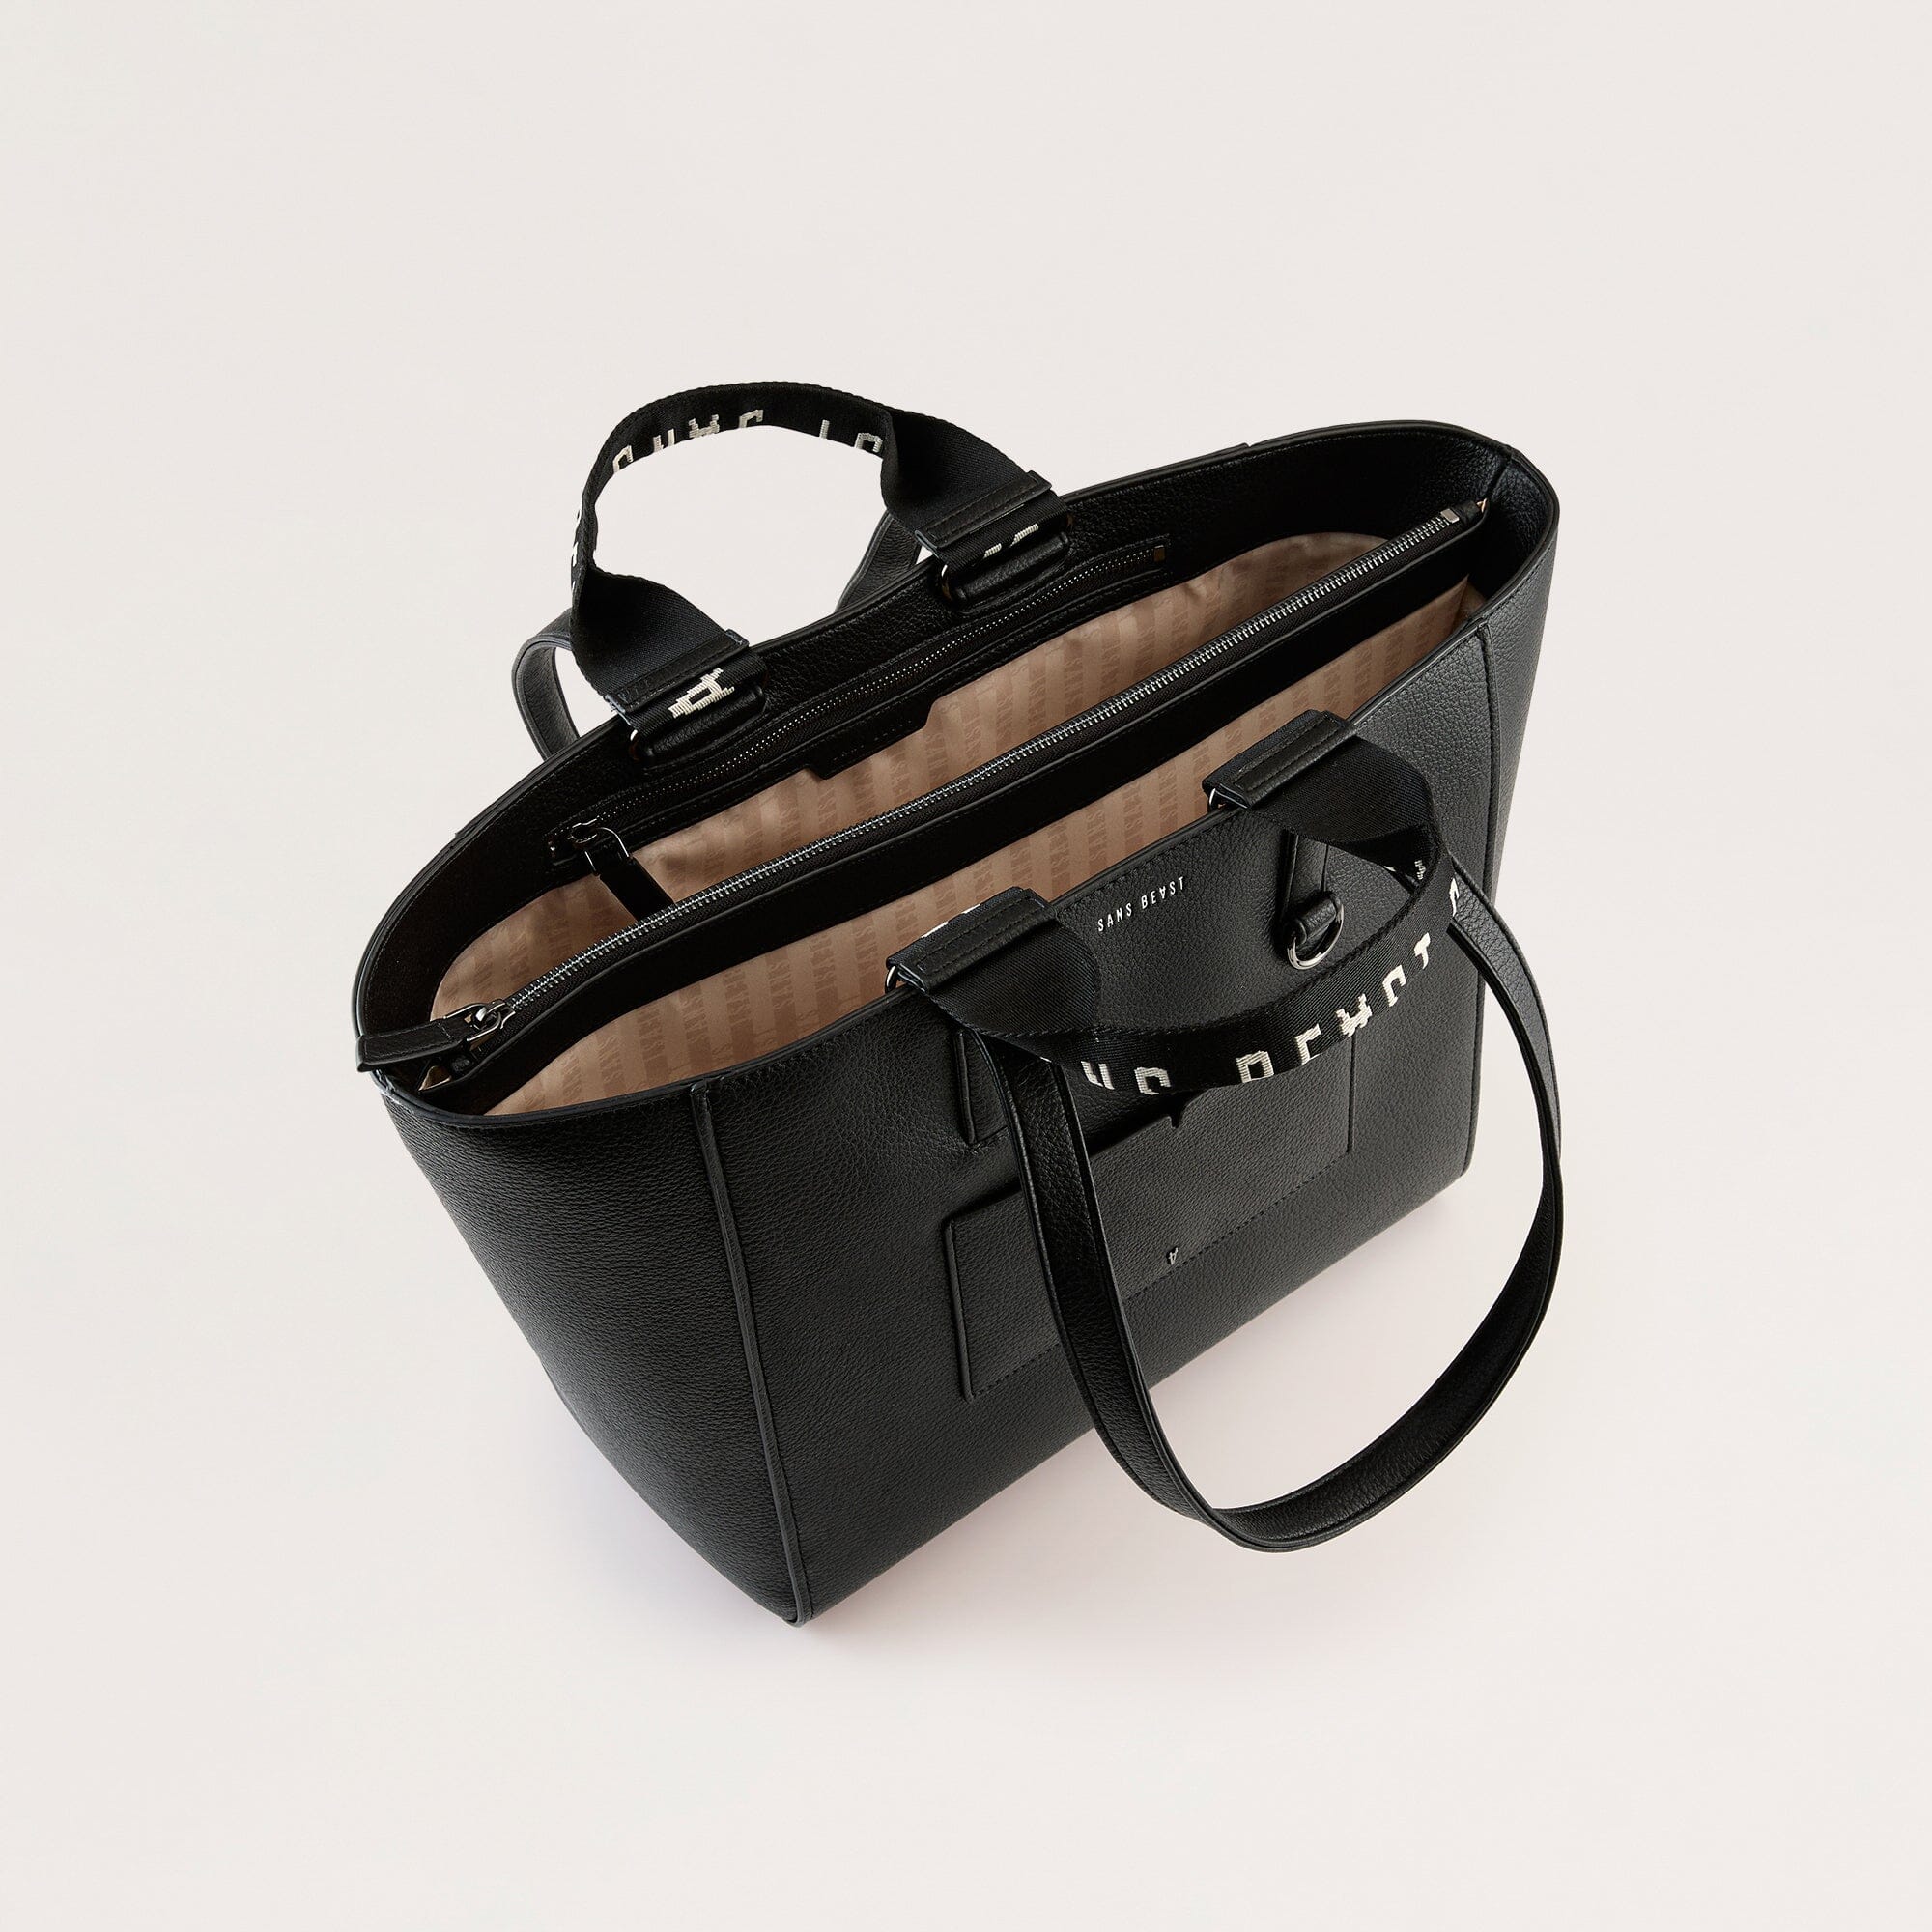 Archive Vegan Leather Tote Bag Black overhead view